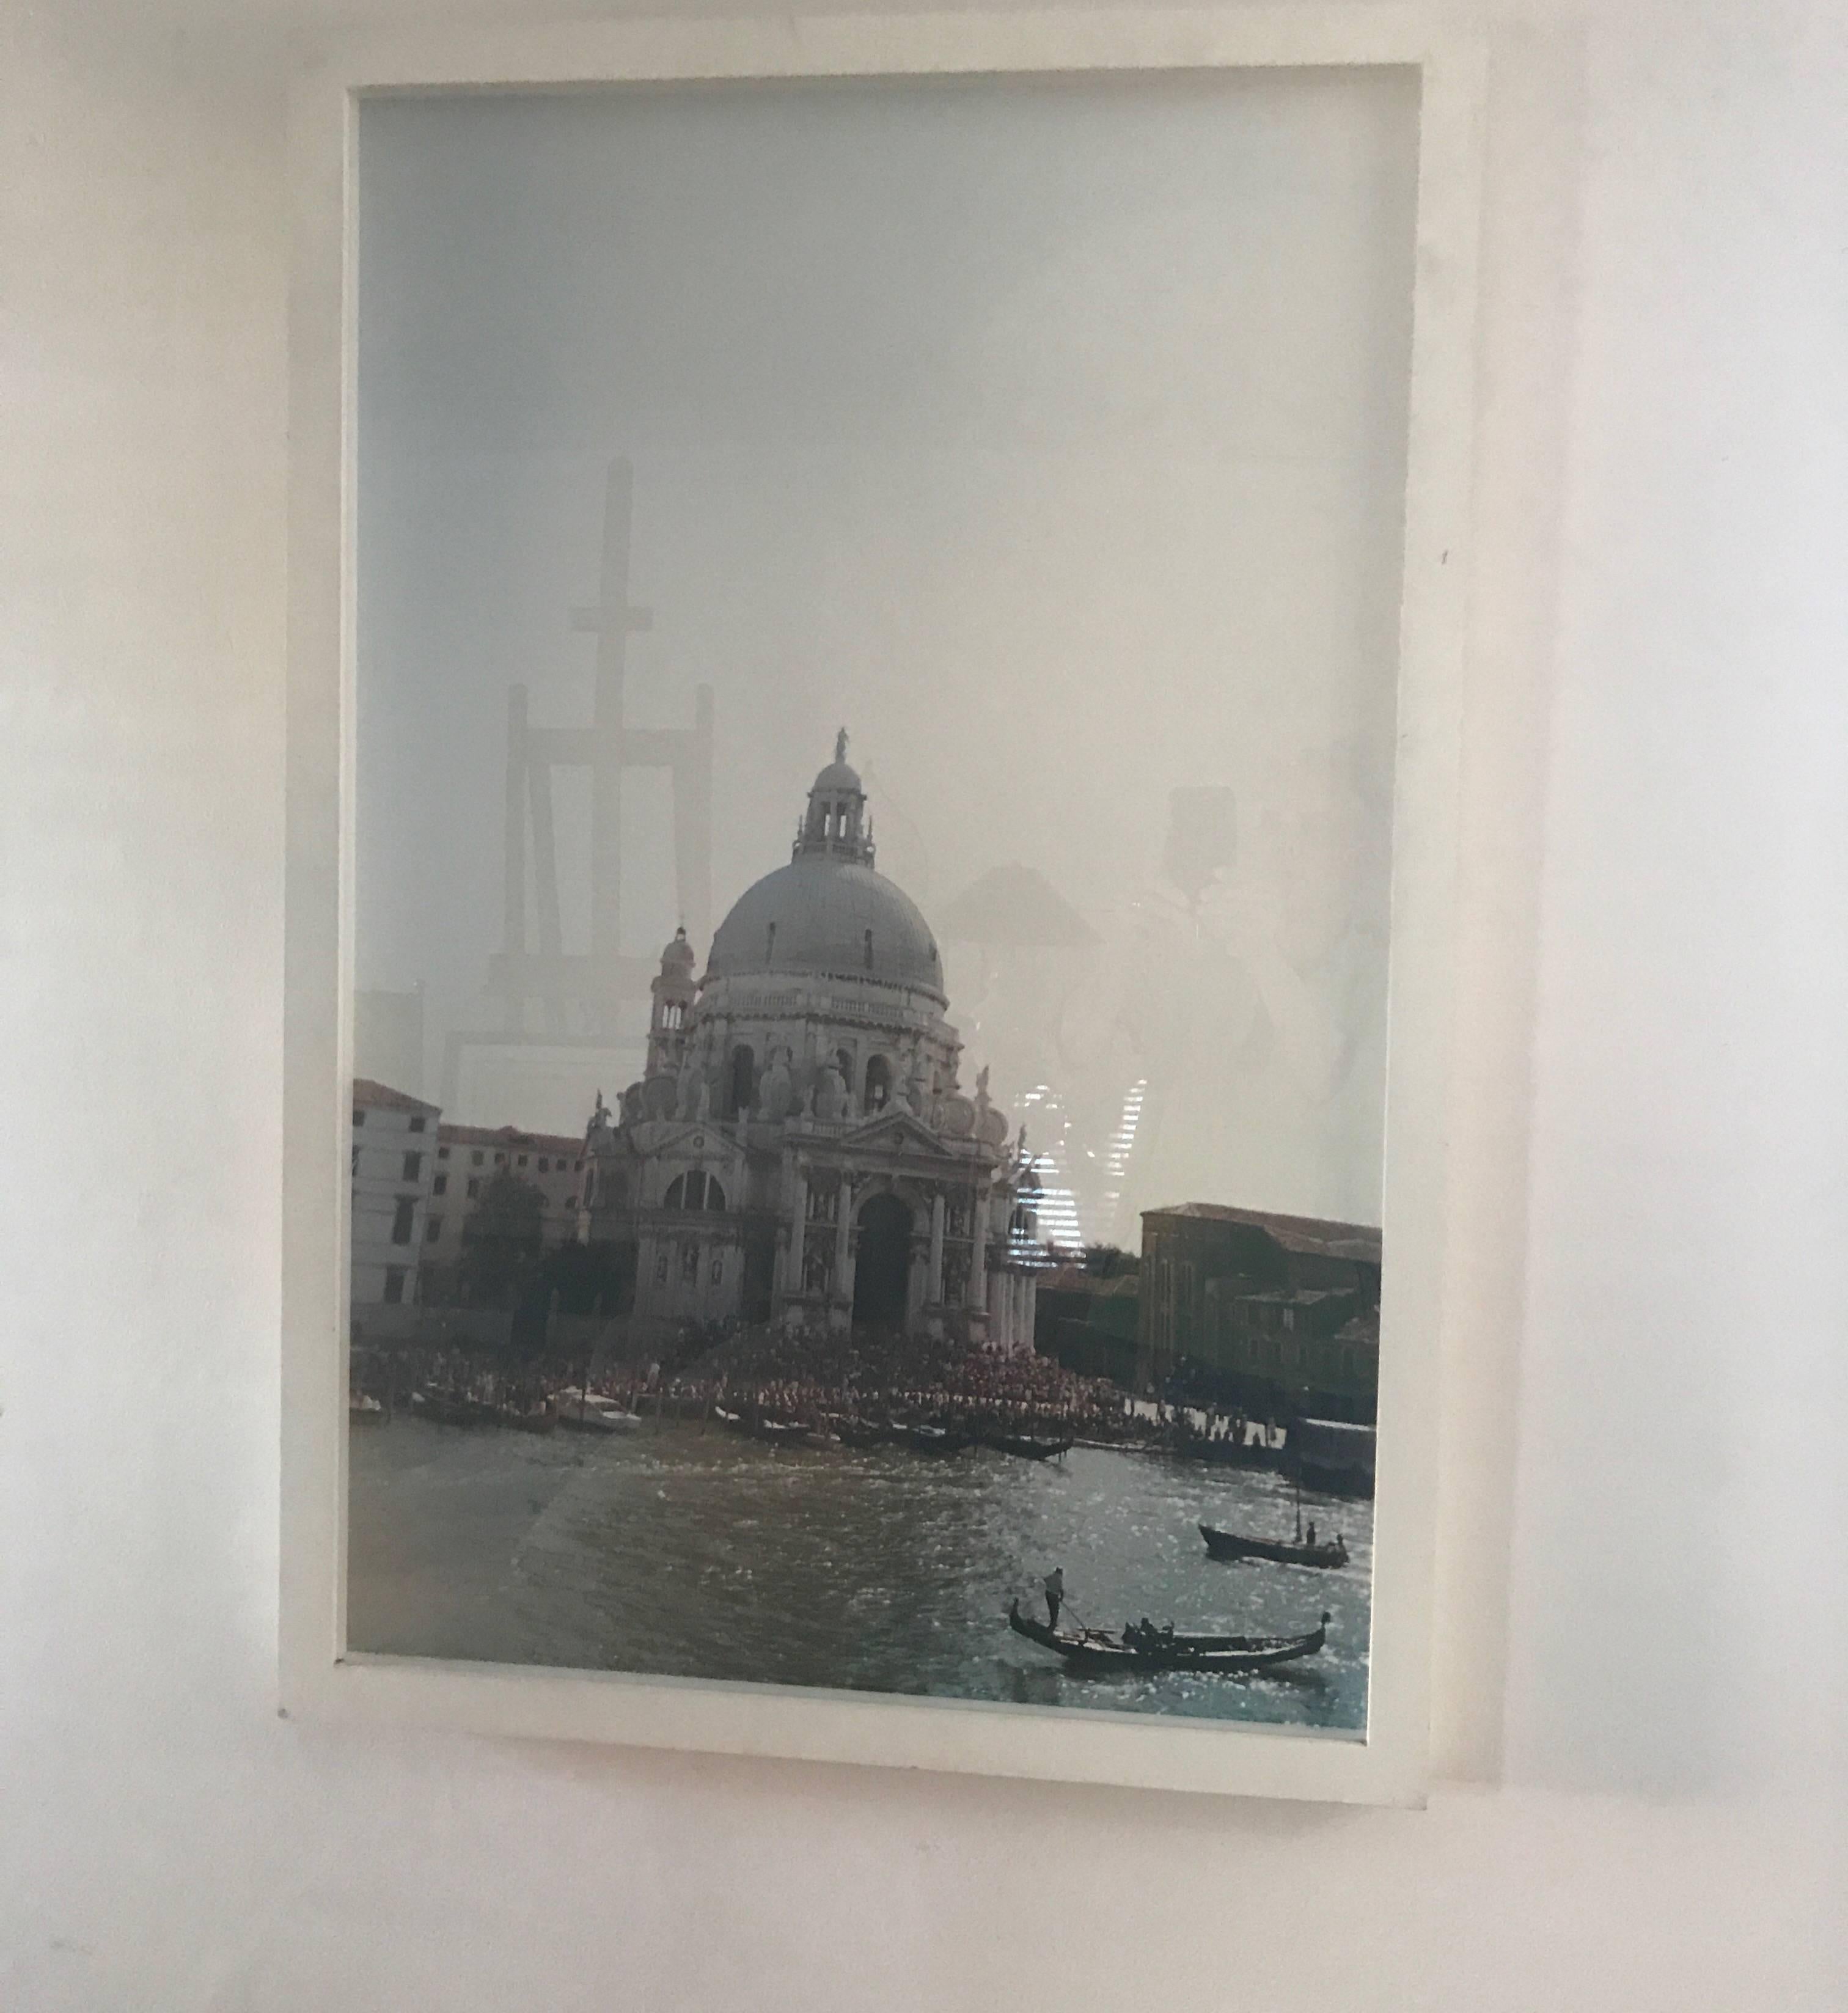 Beautiful framed large scale architectural photograph of the
Basilica of Santa Maria della Salute in Venice.
A modern take on a Grand Tour souvenir.
  